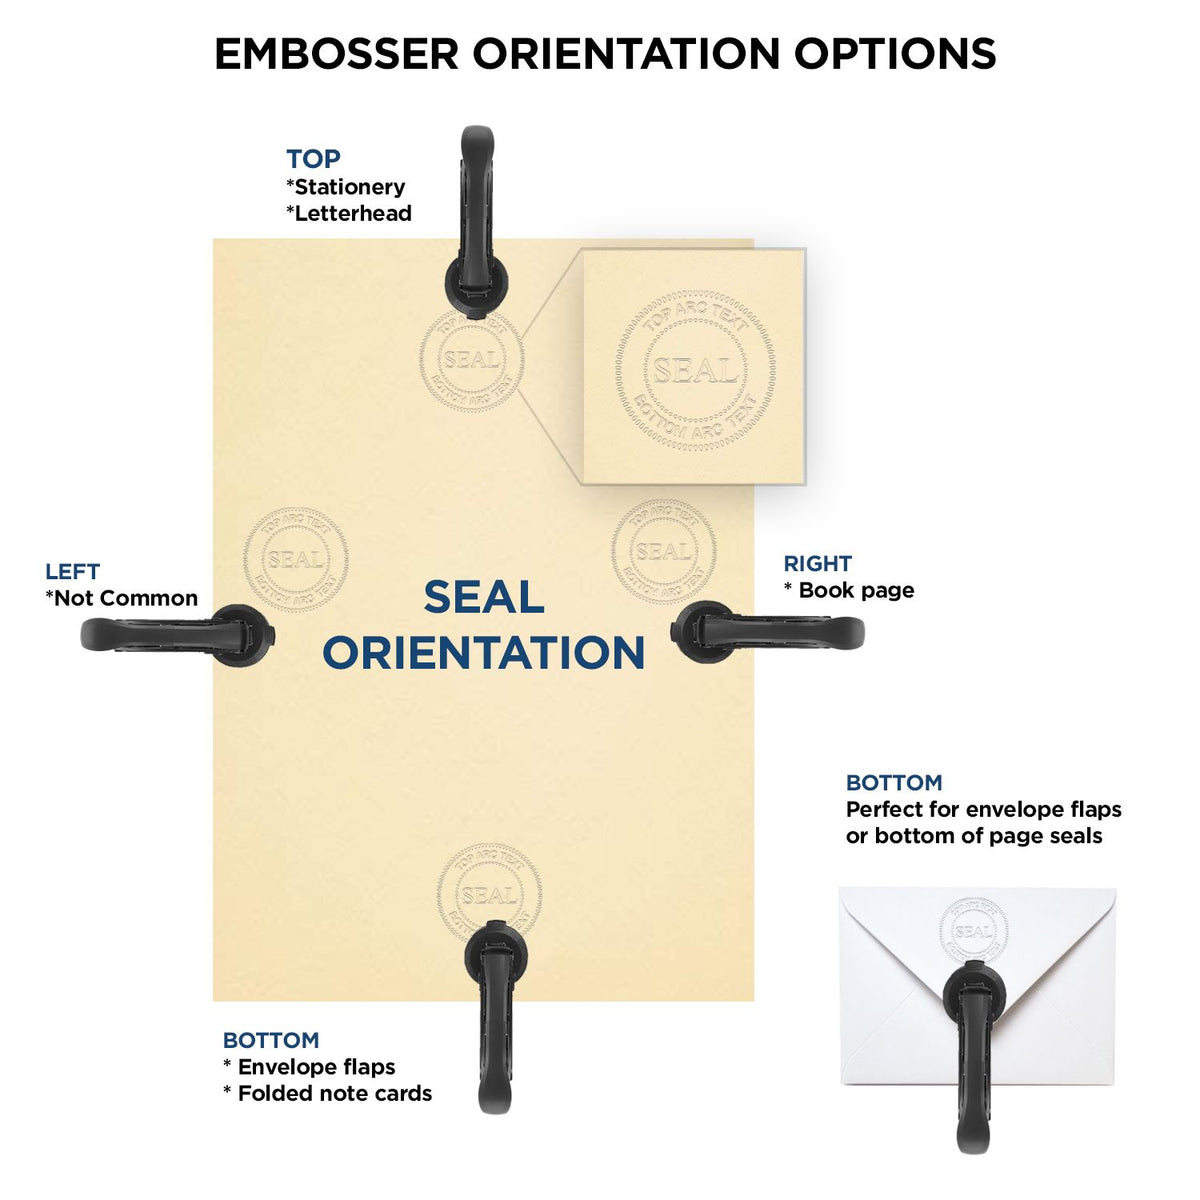 An infographic for the Handheld Idaho Land Surveyor Seal showing embosser orientation, this is showing examples of a top, bottom, right and left insert.